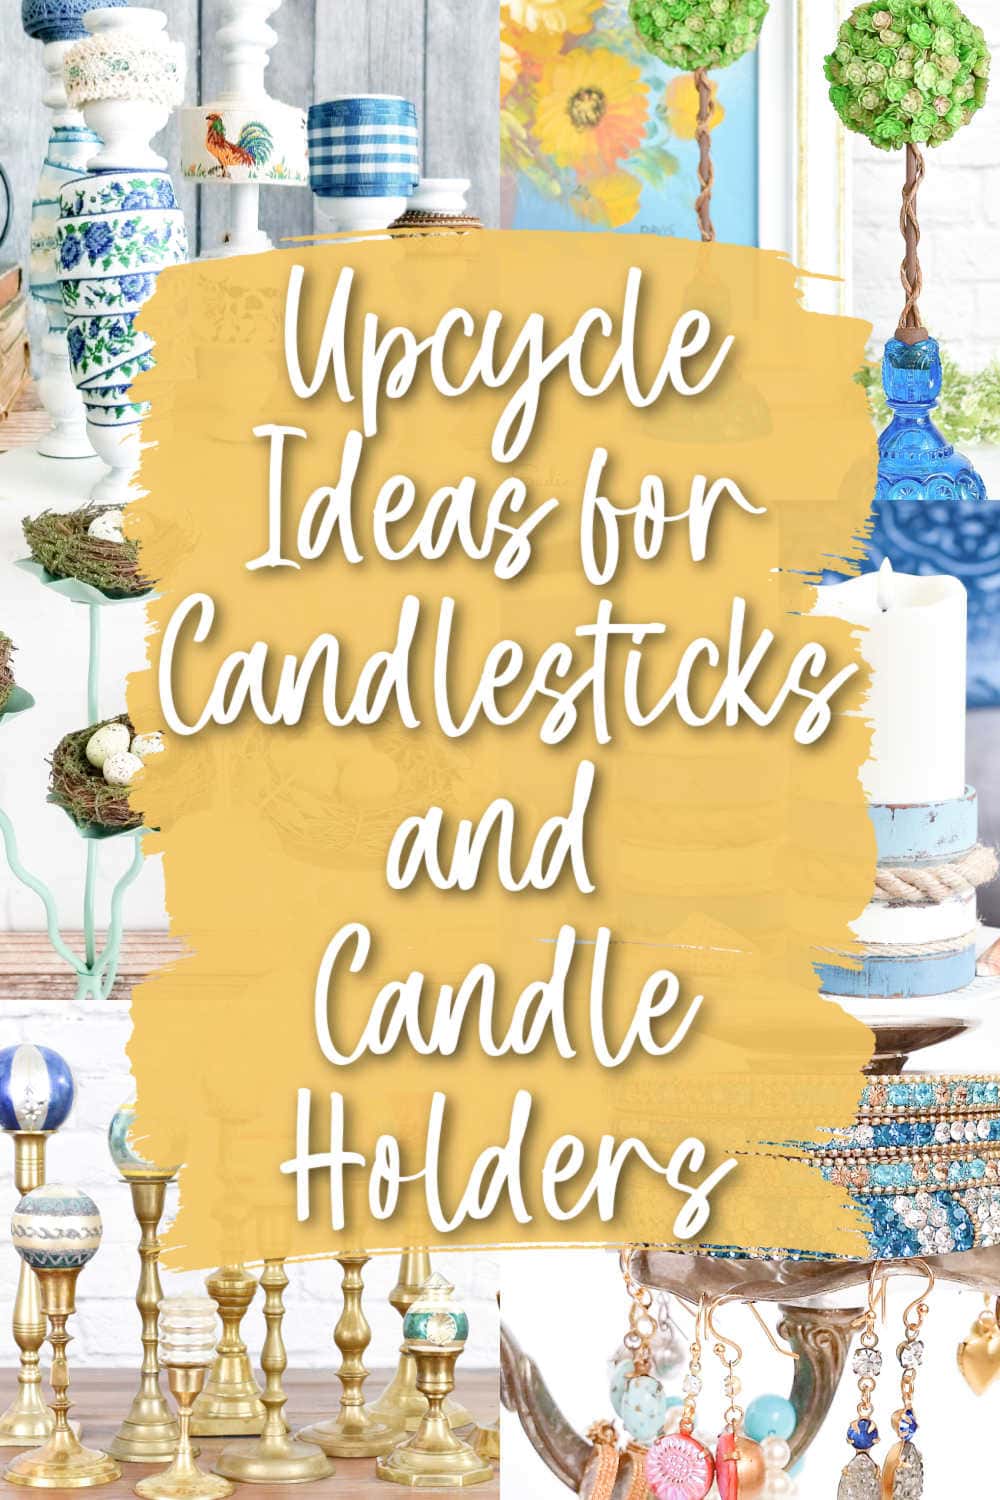 clever ways to repurpose candle holders and candlesticks